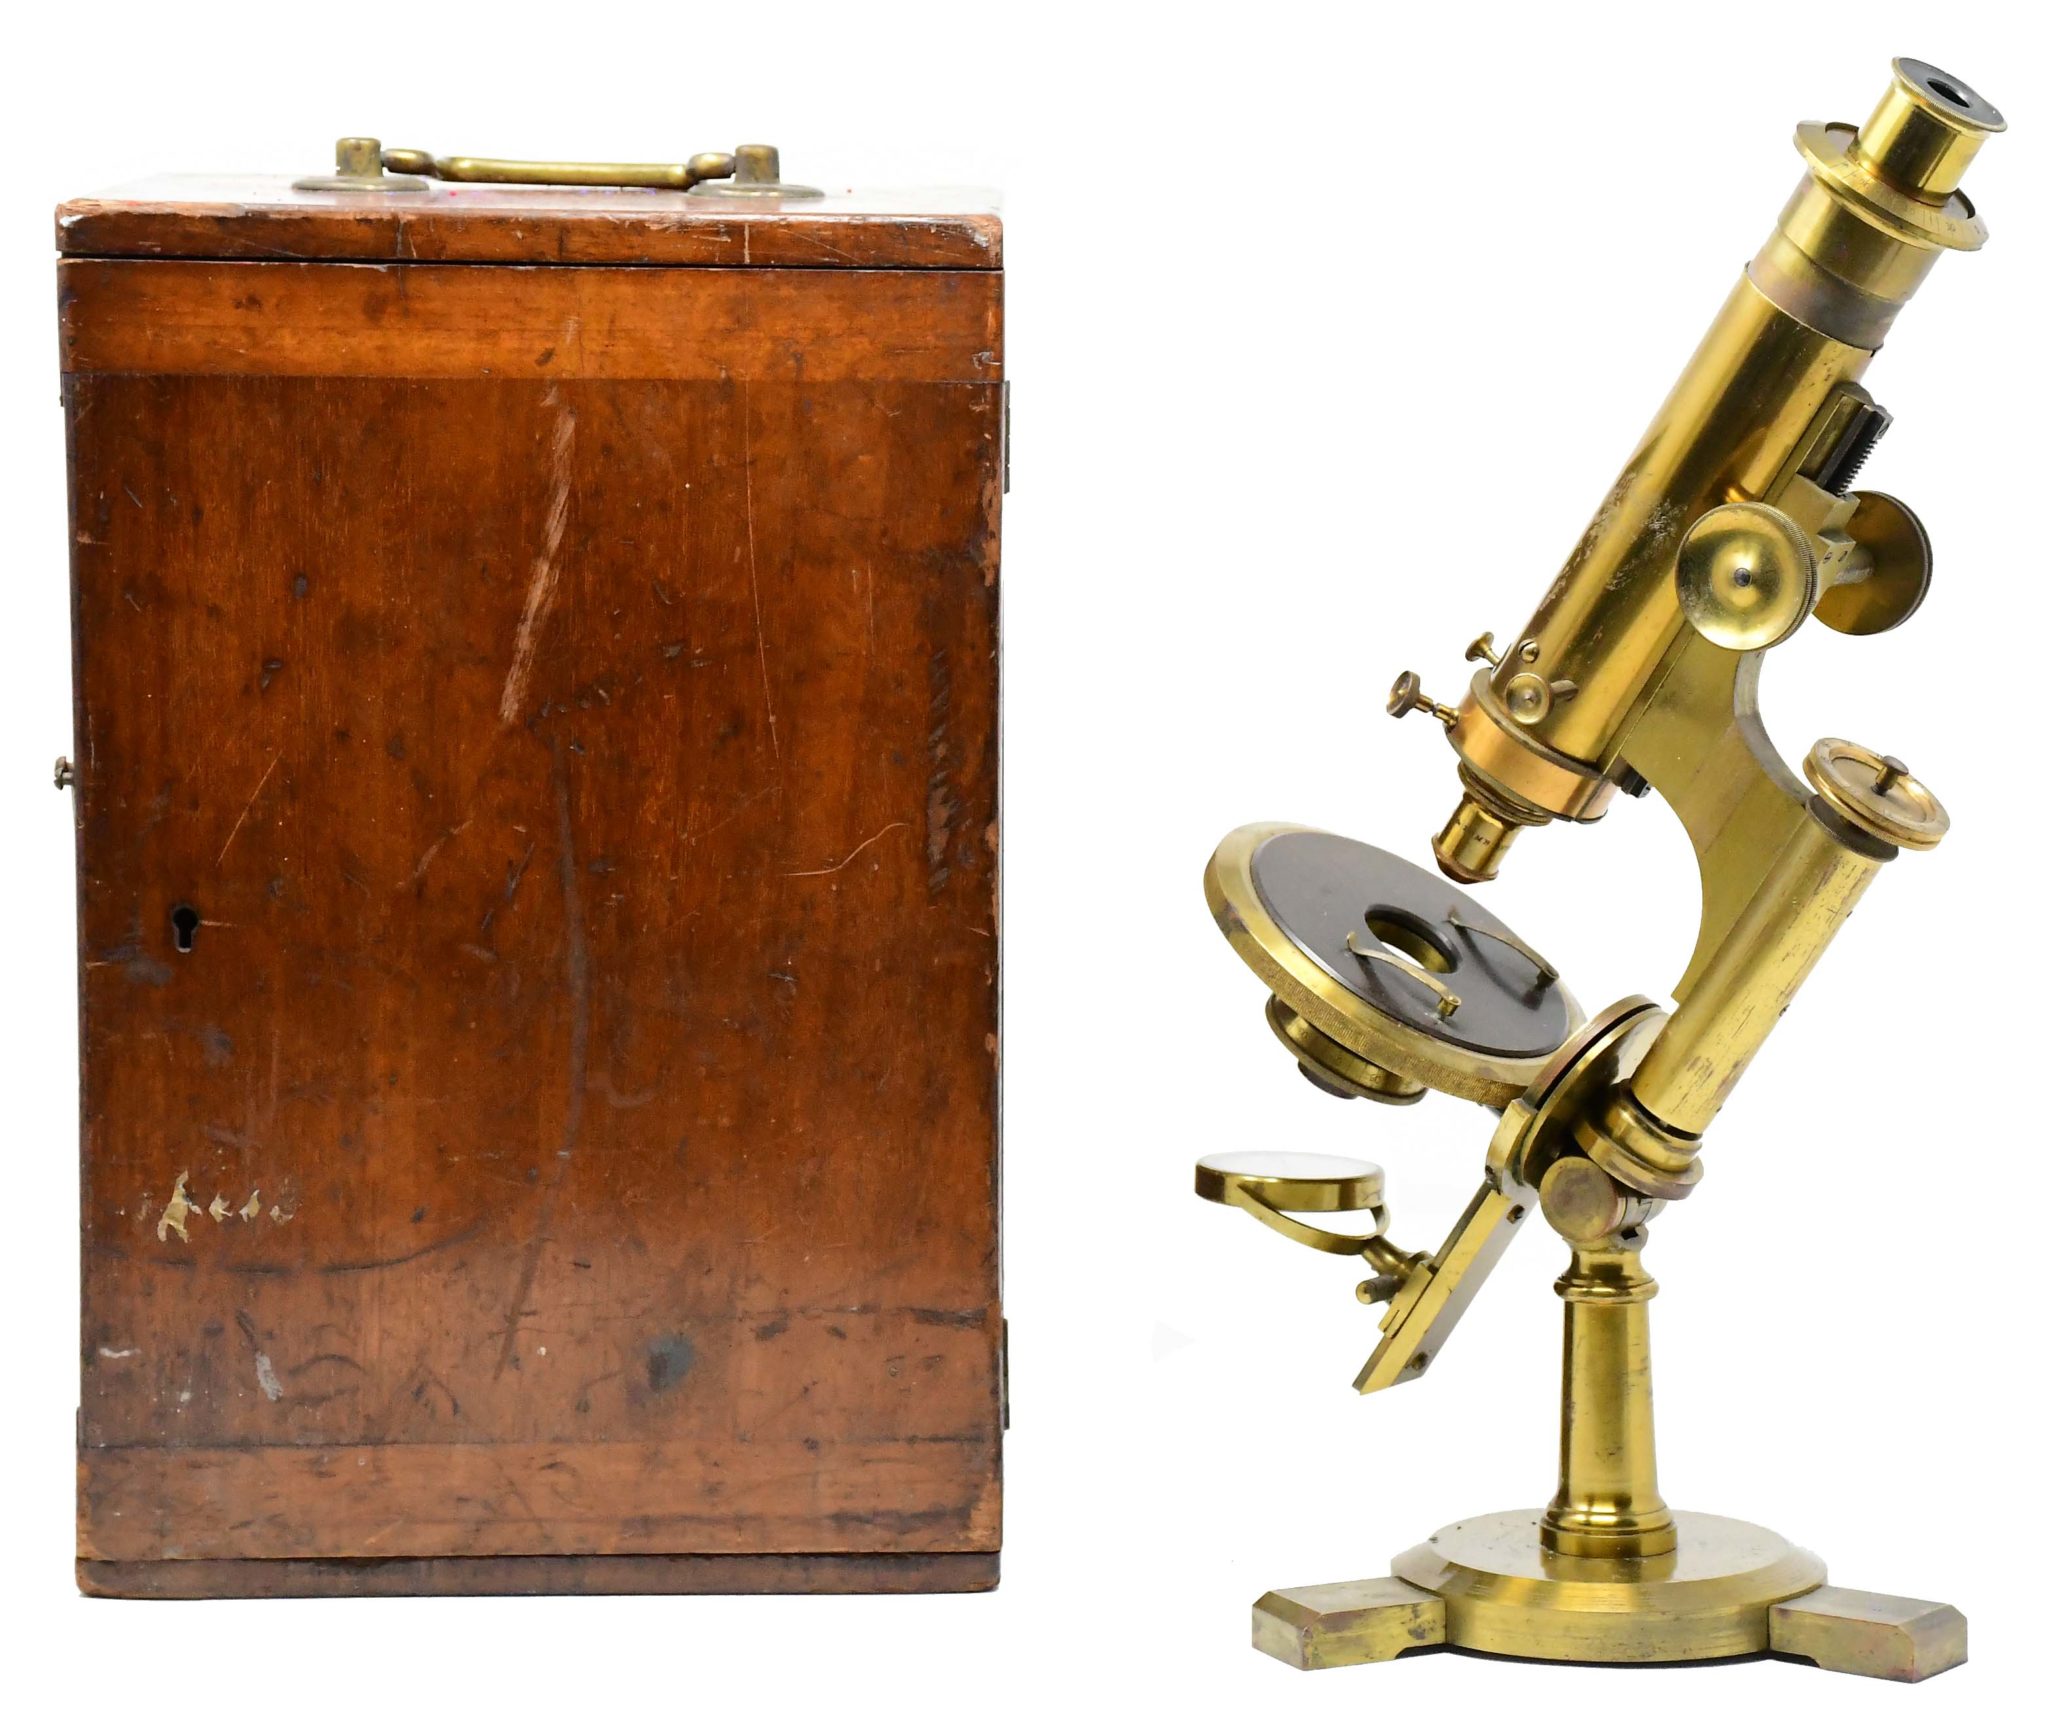 R&J Beck, Prototype of the Lithological Microscope, c. 1880